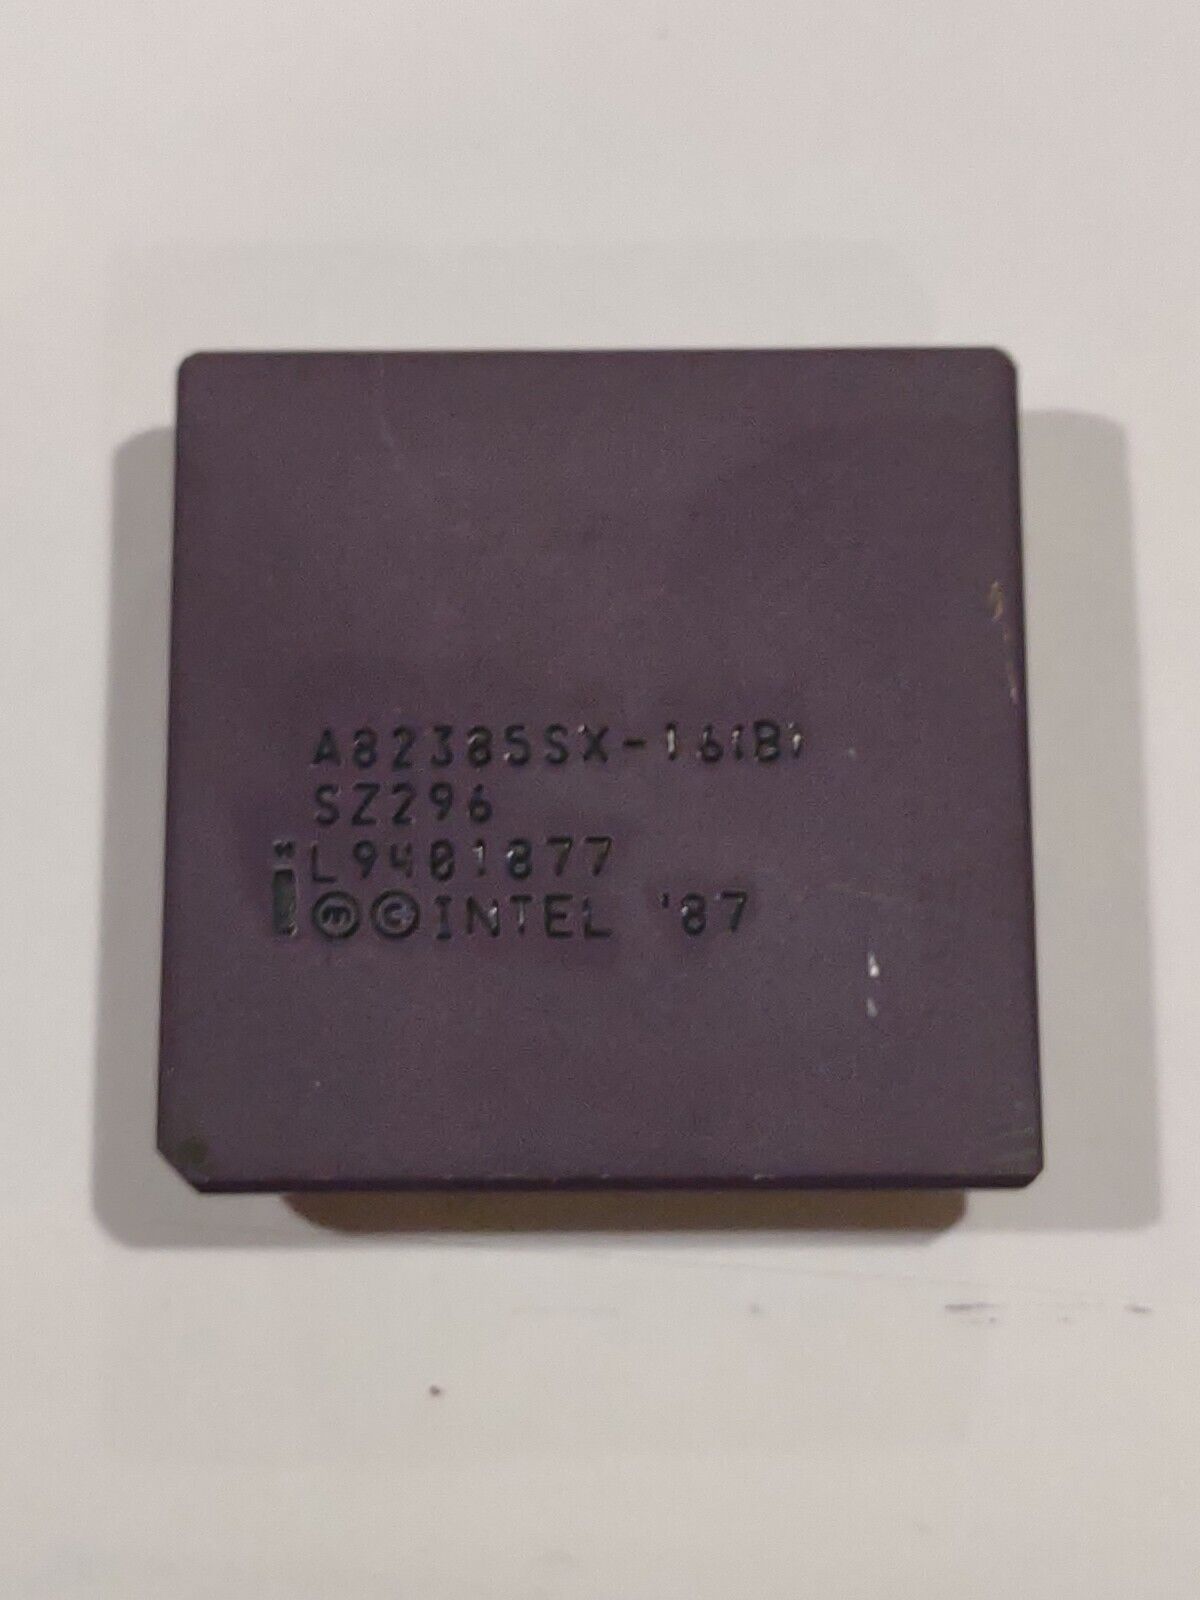 1X RARE INTEL 87'  A80385-25 VINTAGE CERAMIC CPU COLLECTION /  GOLD  RECOVERY 